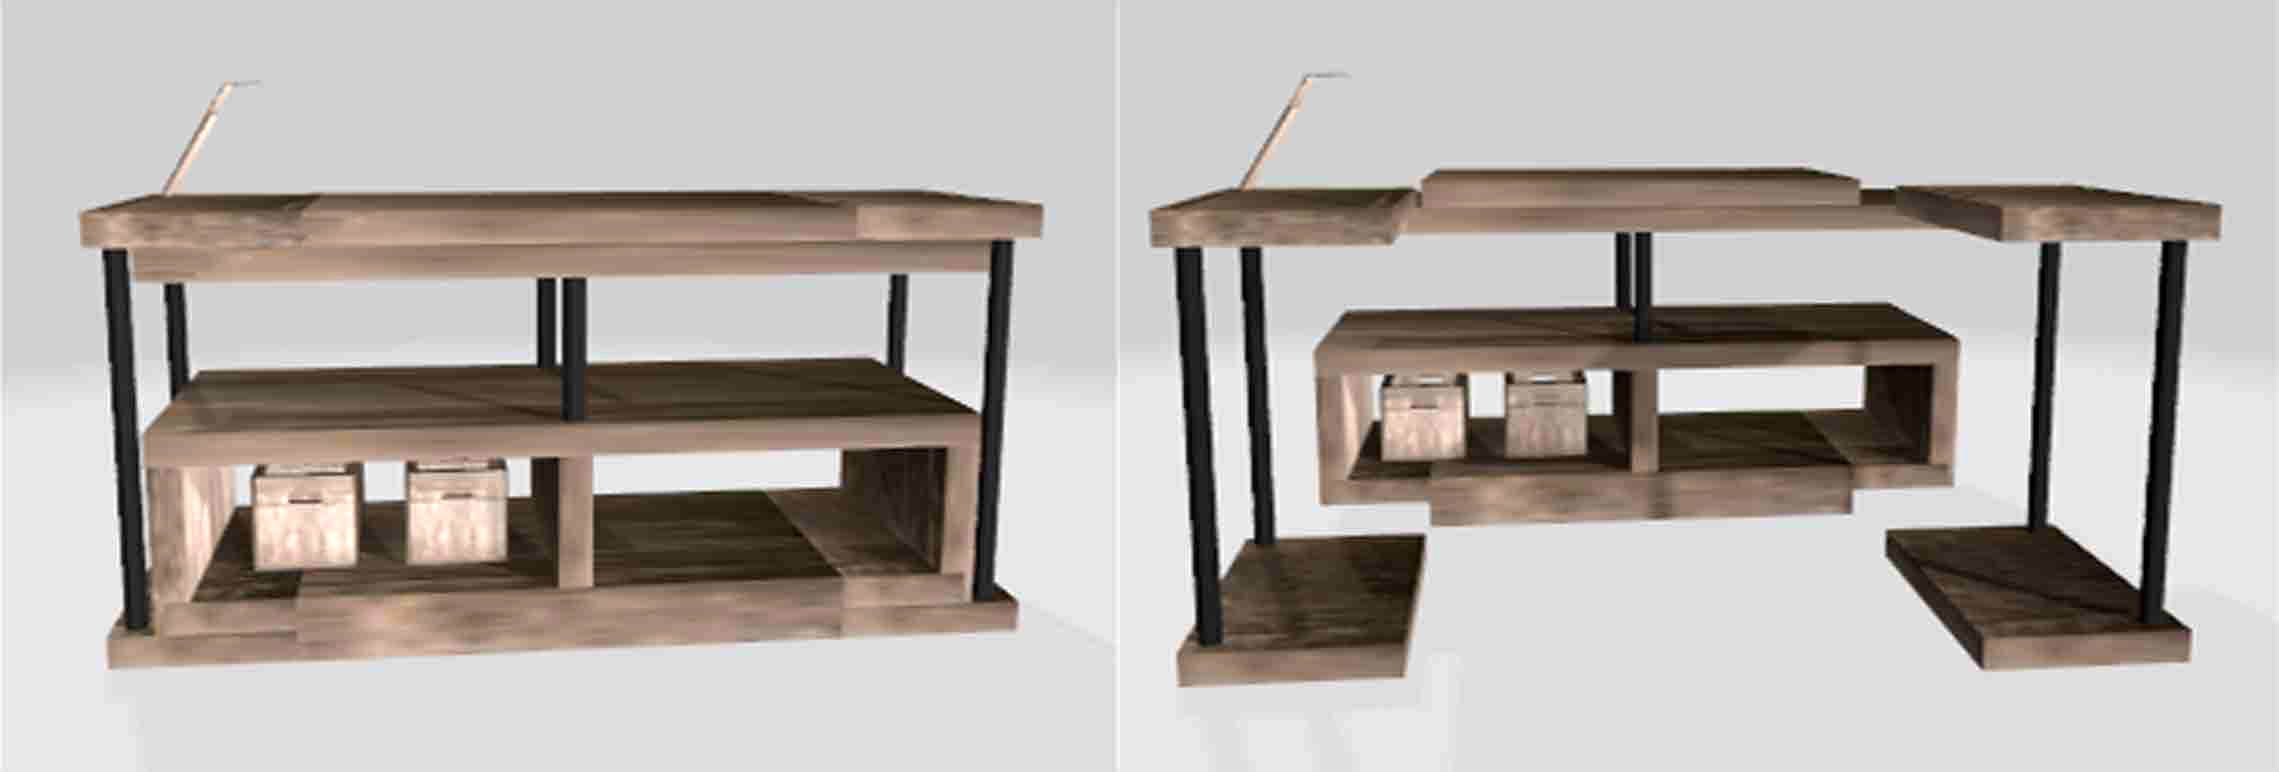 Table design consisting of three pieces: the main table and two smaller tables that pop out to be used as side tables when needed